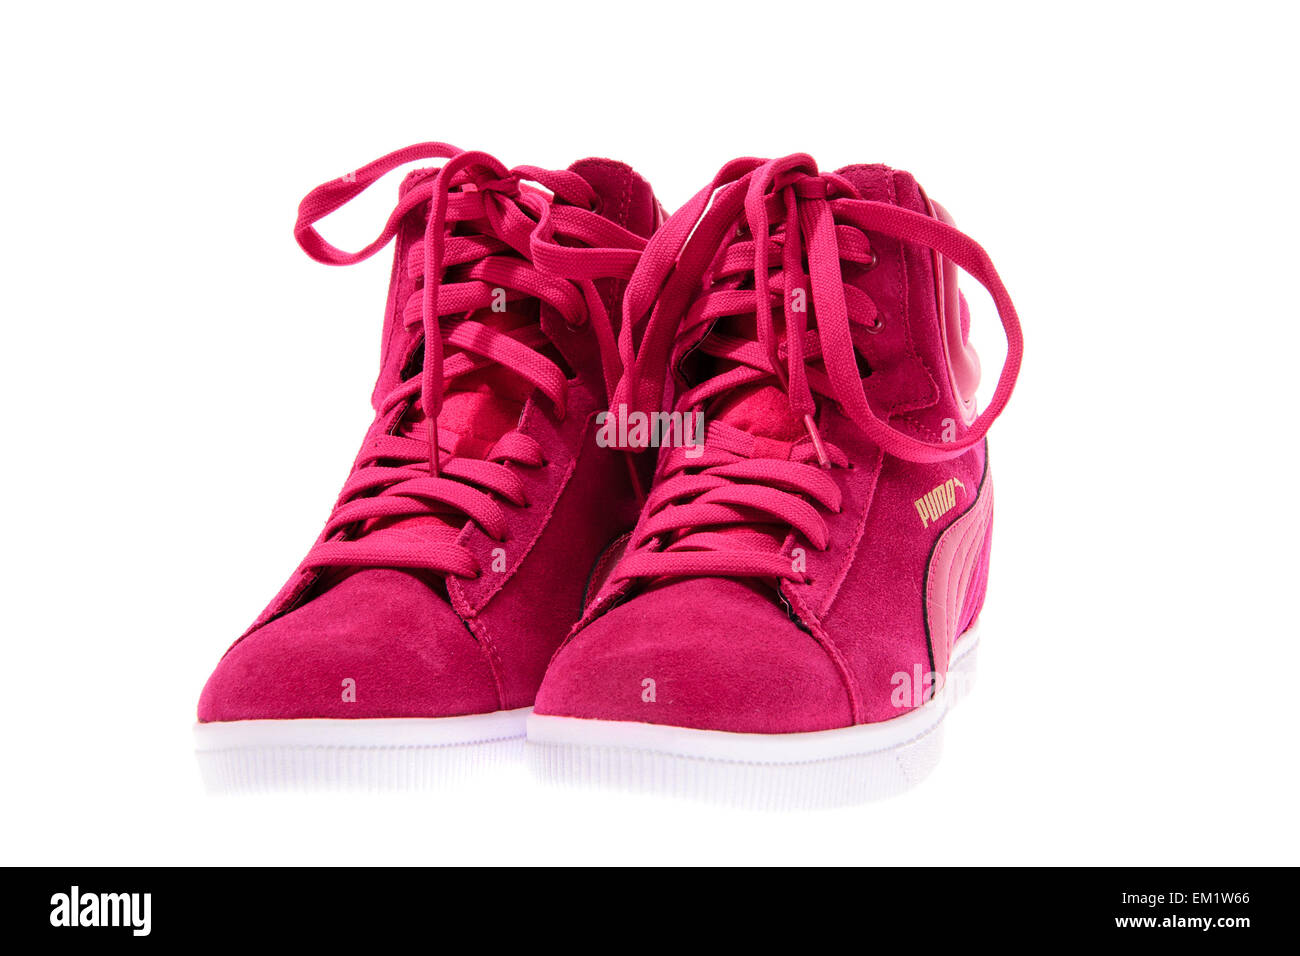 Minsk, Belarus - March 18, 2015: Pink Female Beautiful Shoes Puma with High  Heels. Isolated on White Background. Puma - a German Stock Photo - Alamy